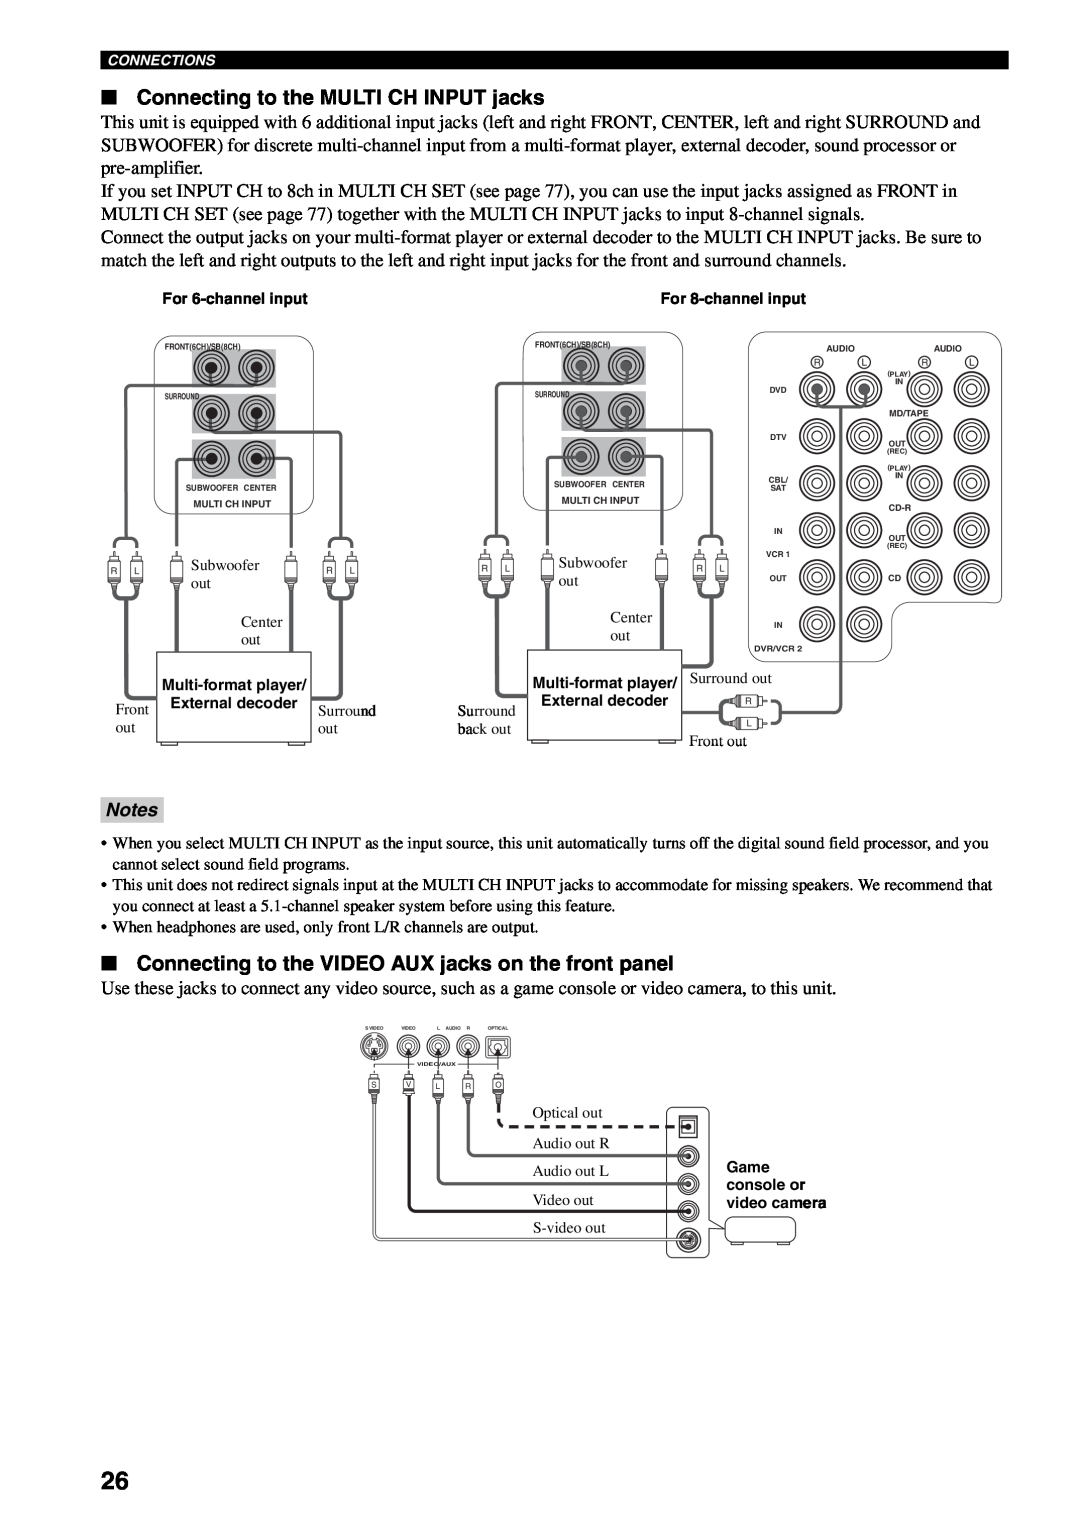 Yamaha RX-V1600 Connecting to the MULTI CH INPUT jacks, Notes, For 6-channelinput, Multi-formatplayer External decoder 